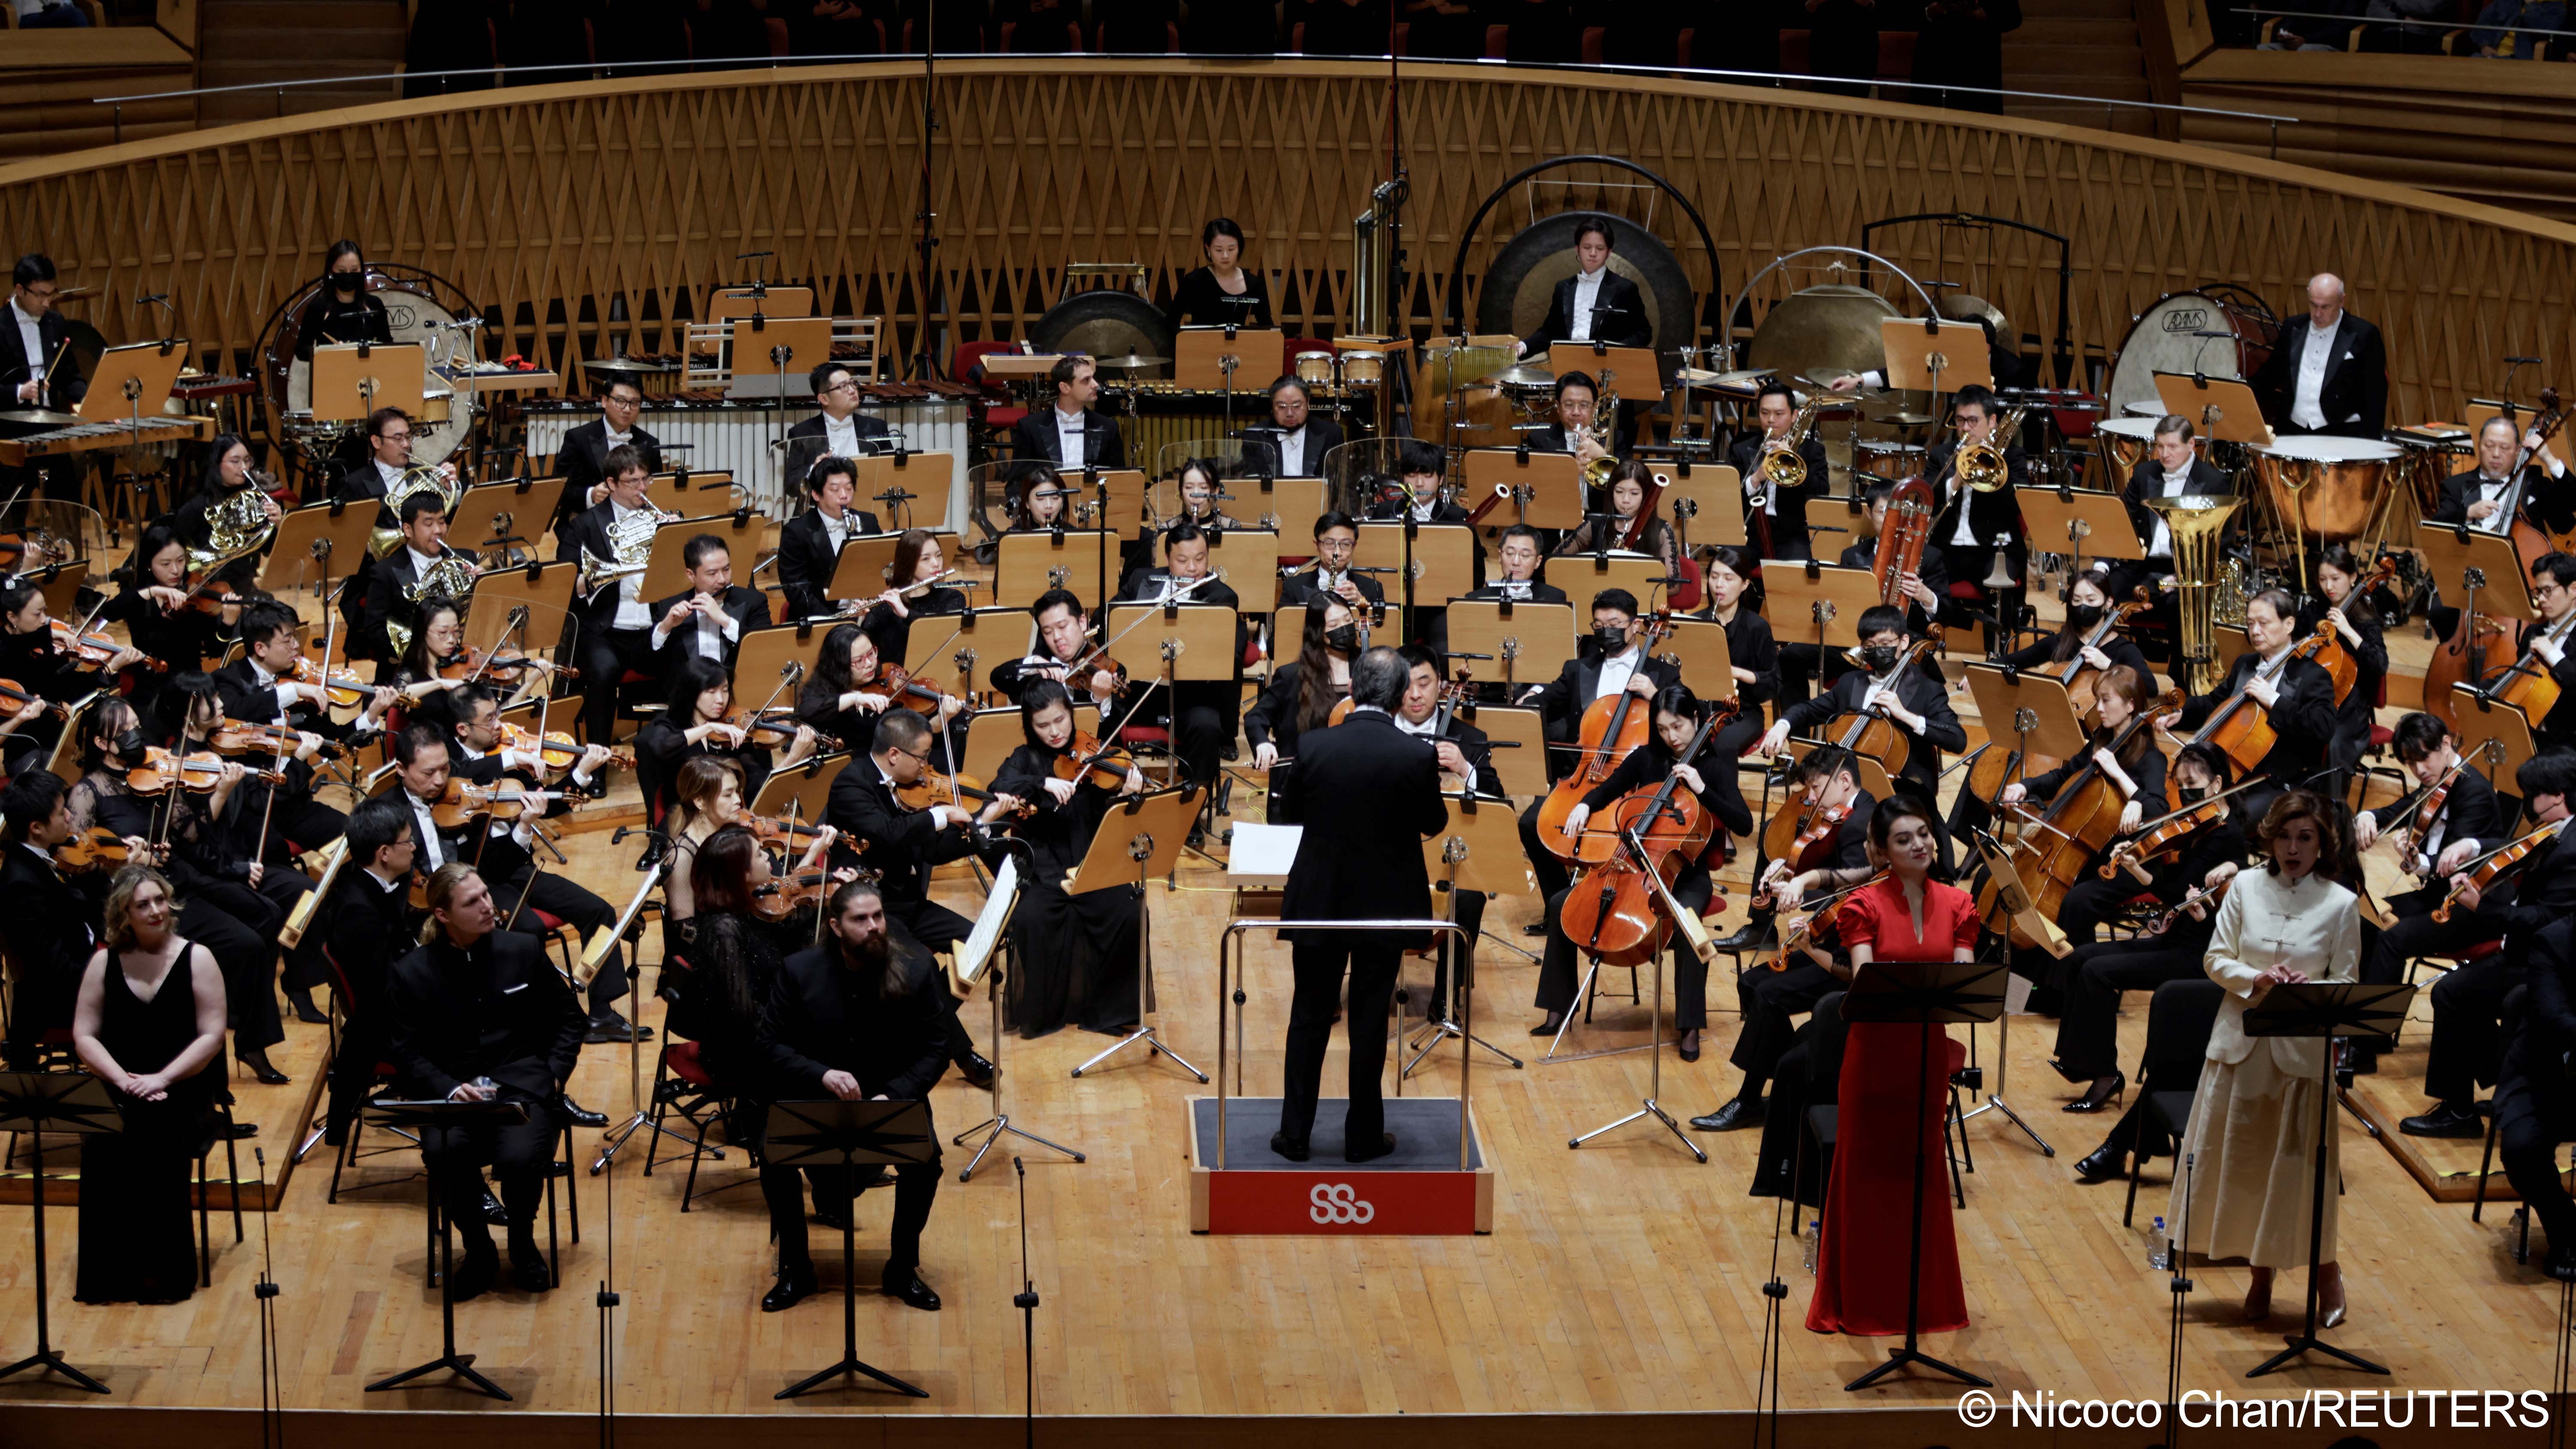 Orchestra and vocal soloists performing in Shanghai, China